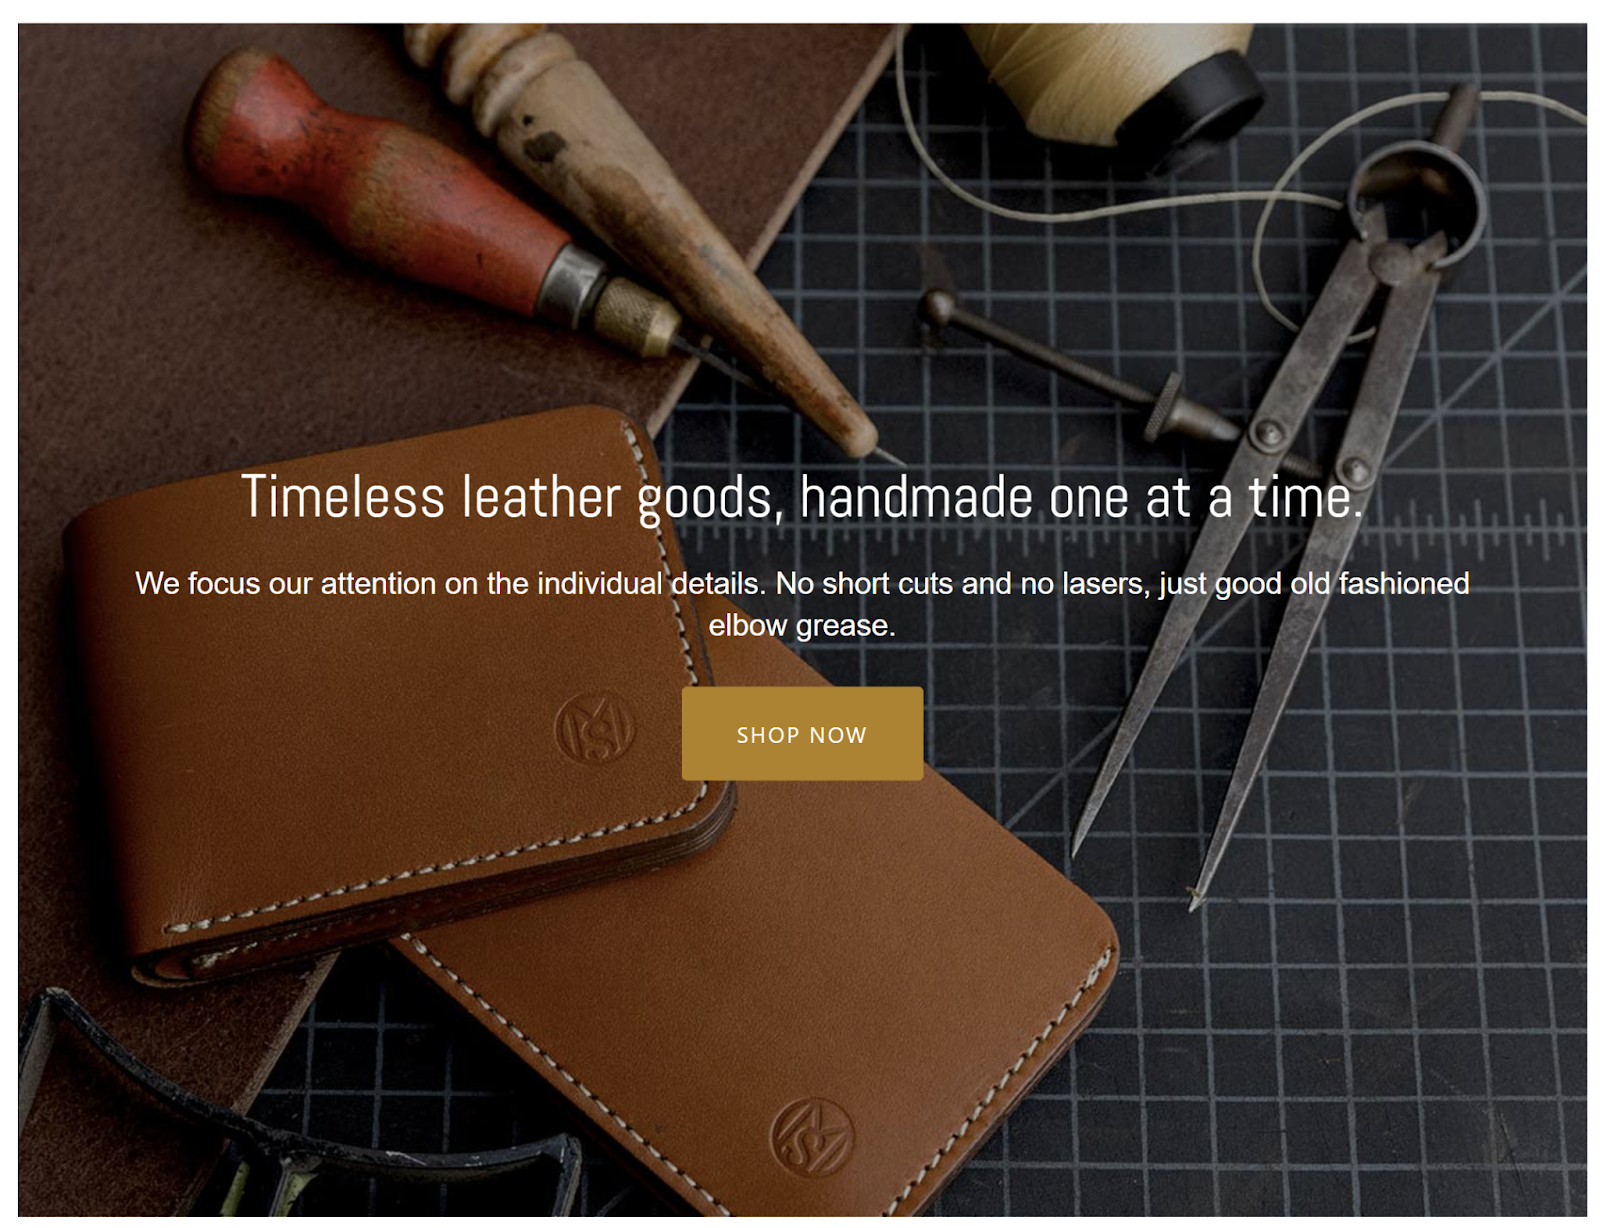 Online ad showing leather crafting tools and handmade wallets, with a brand message about timeless, handmade leather goods.